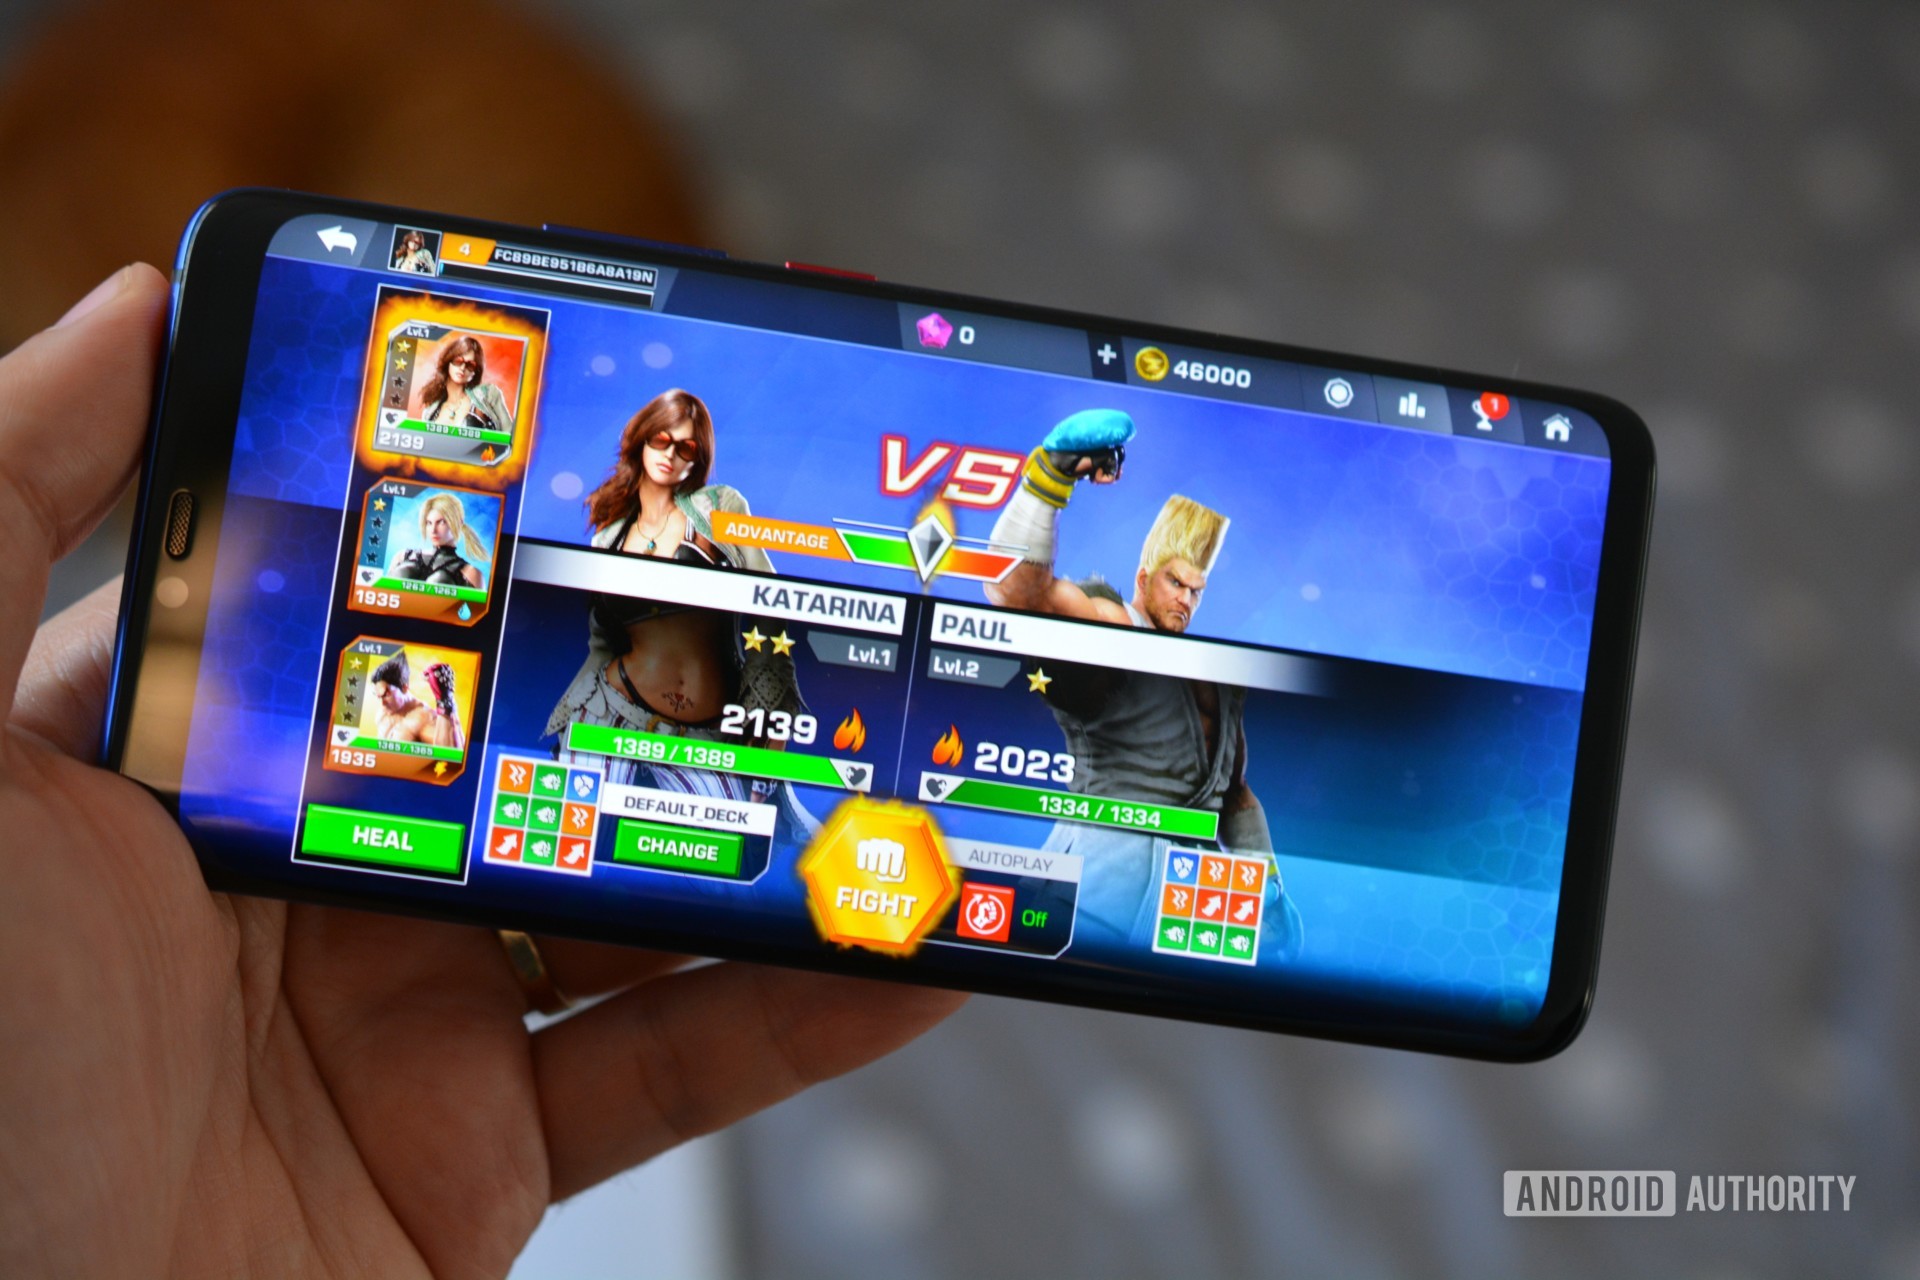 huawei mate 20 pro with a game on the screen